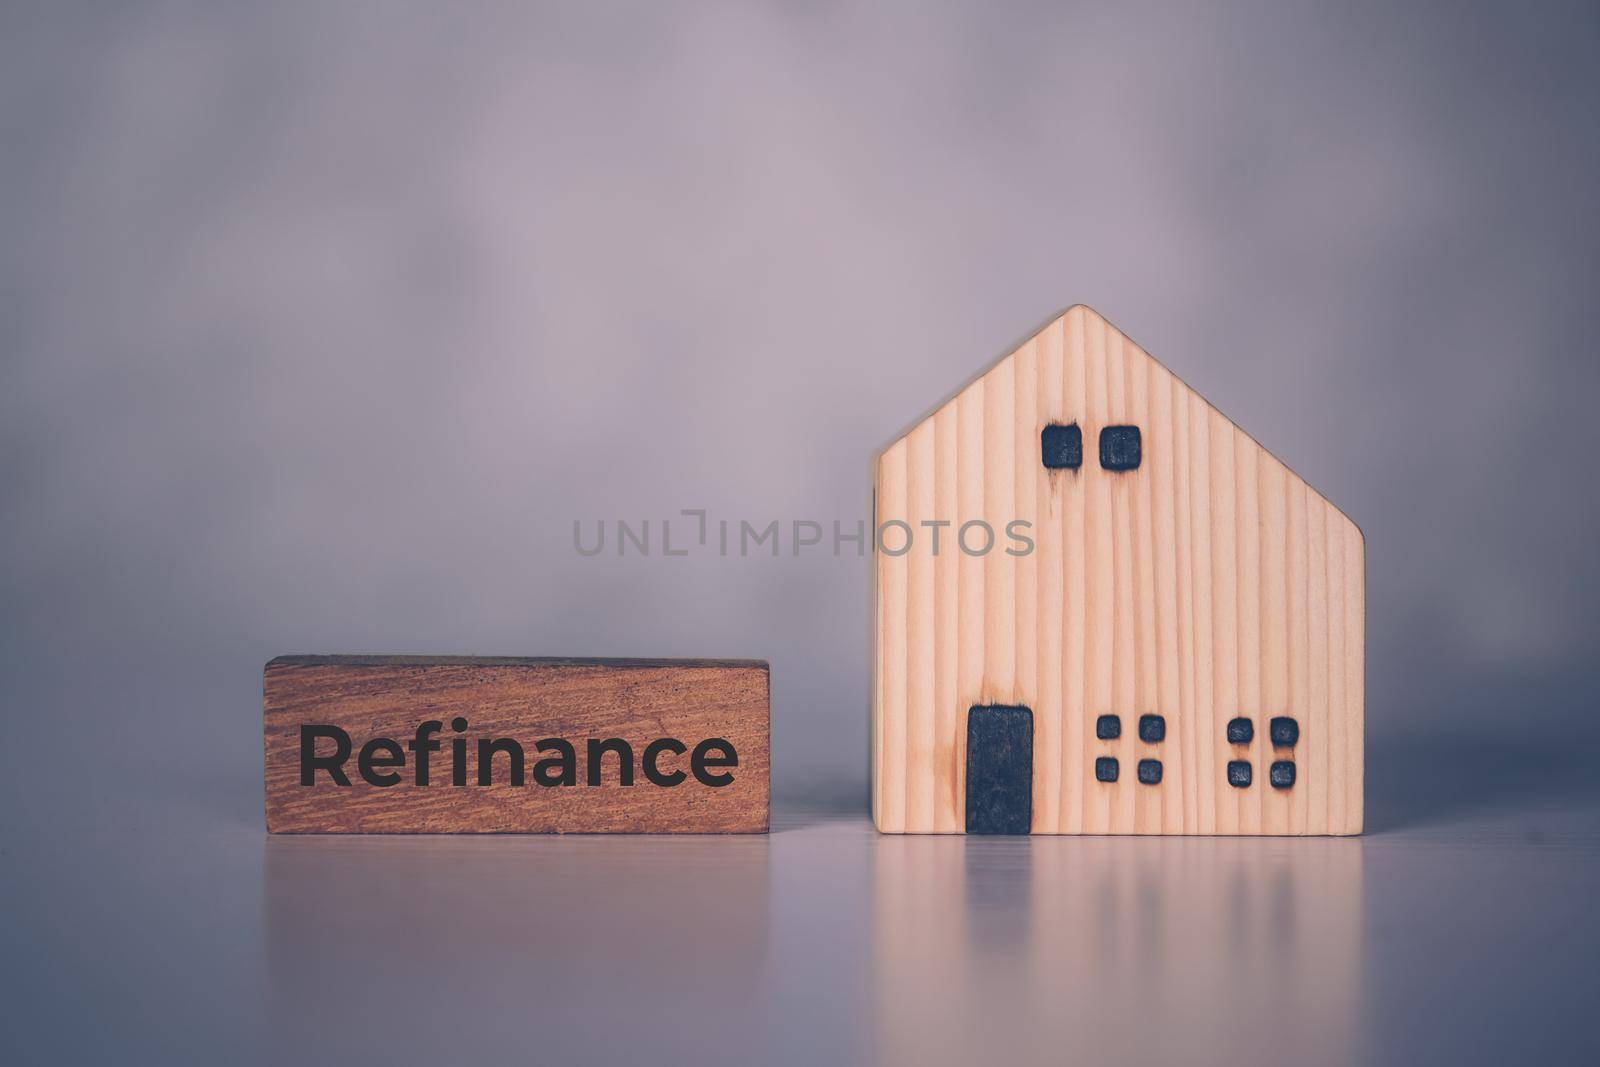 Wooden block with refinance word and house model about home and finance, loan and mortgage for real estate and property, residential and planning with budget, investment and earning, business concept.